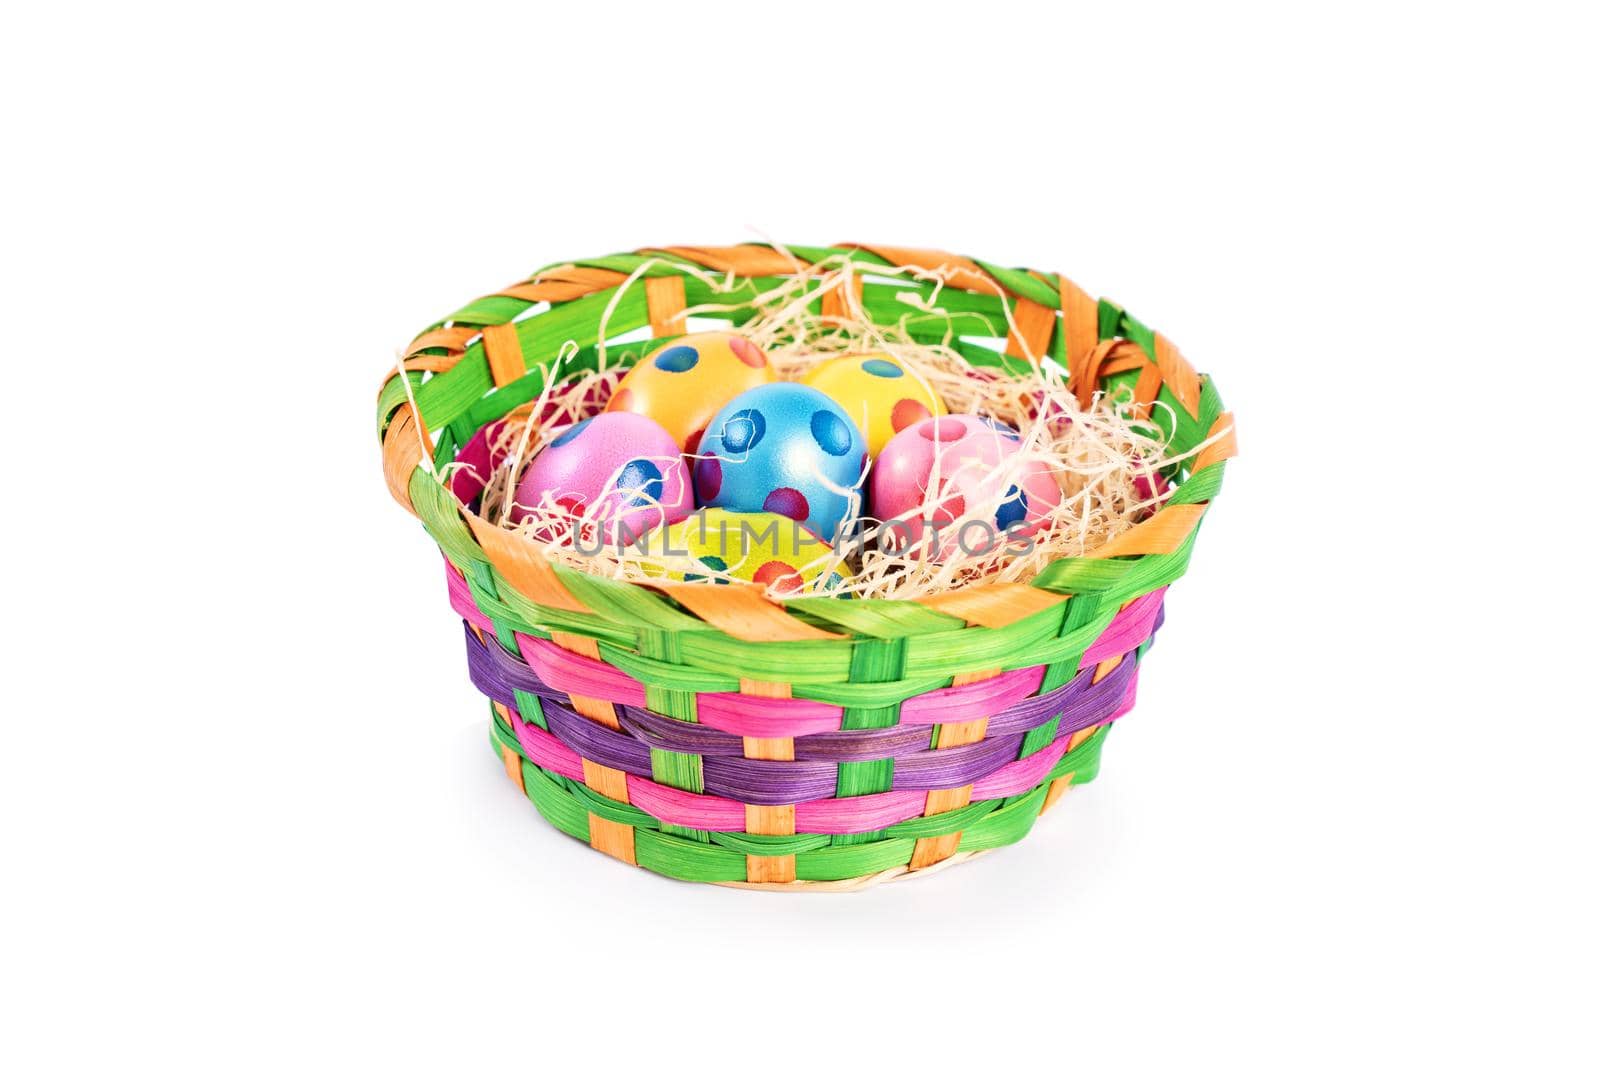 Colourful Easter eggs with polka dots in a colorful basket by Mendelex